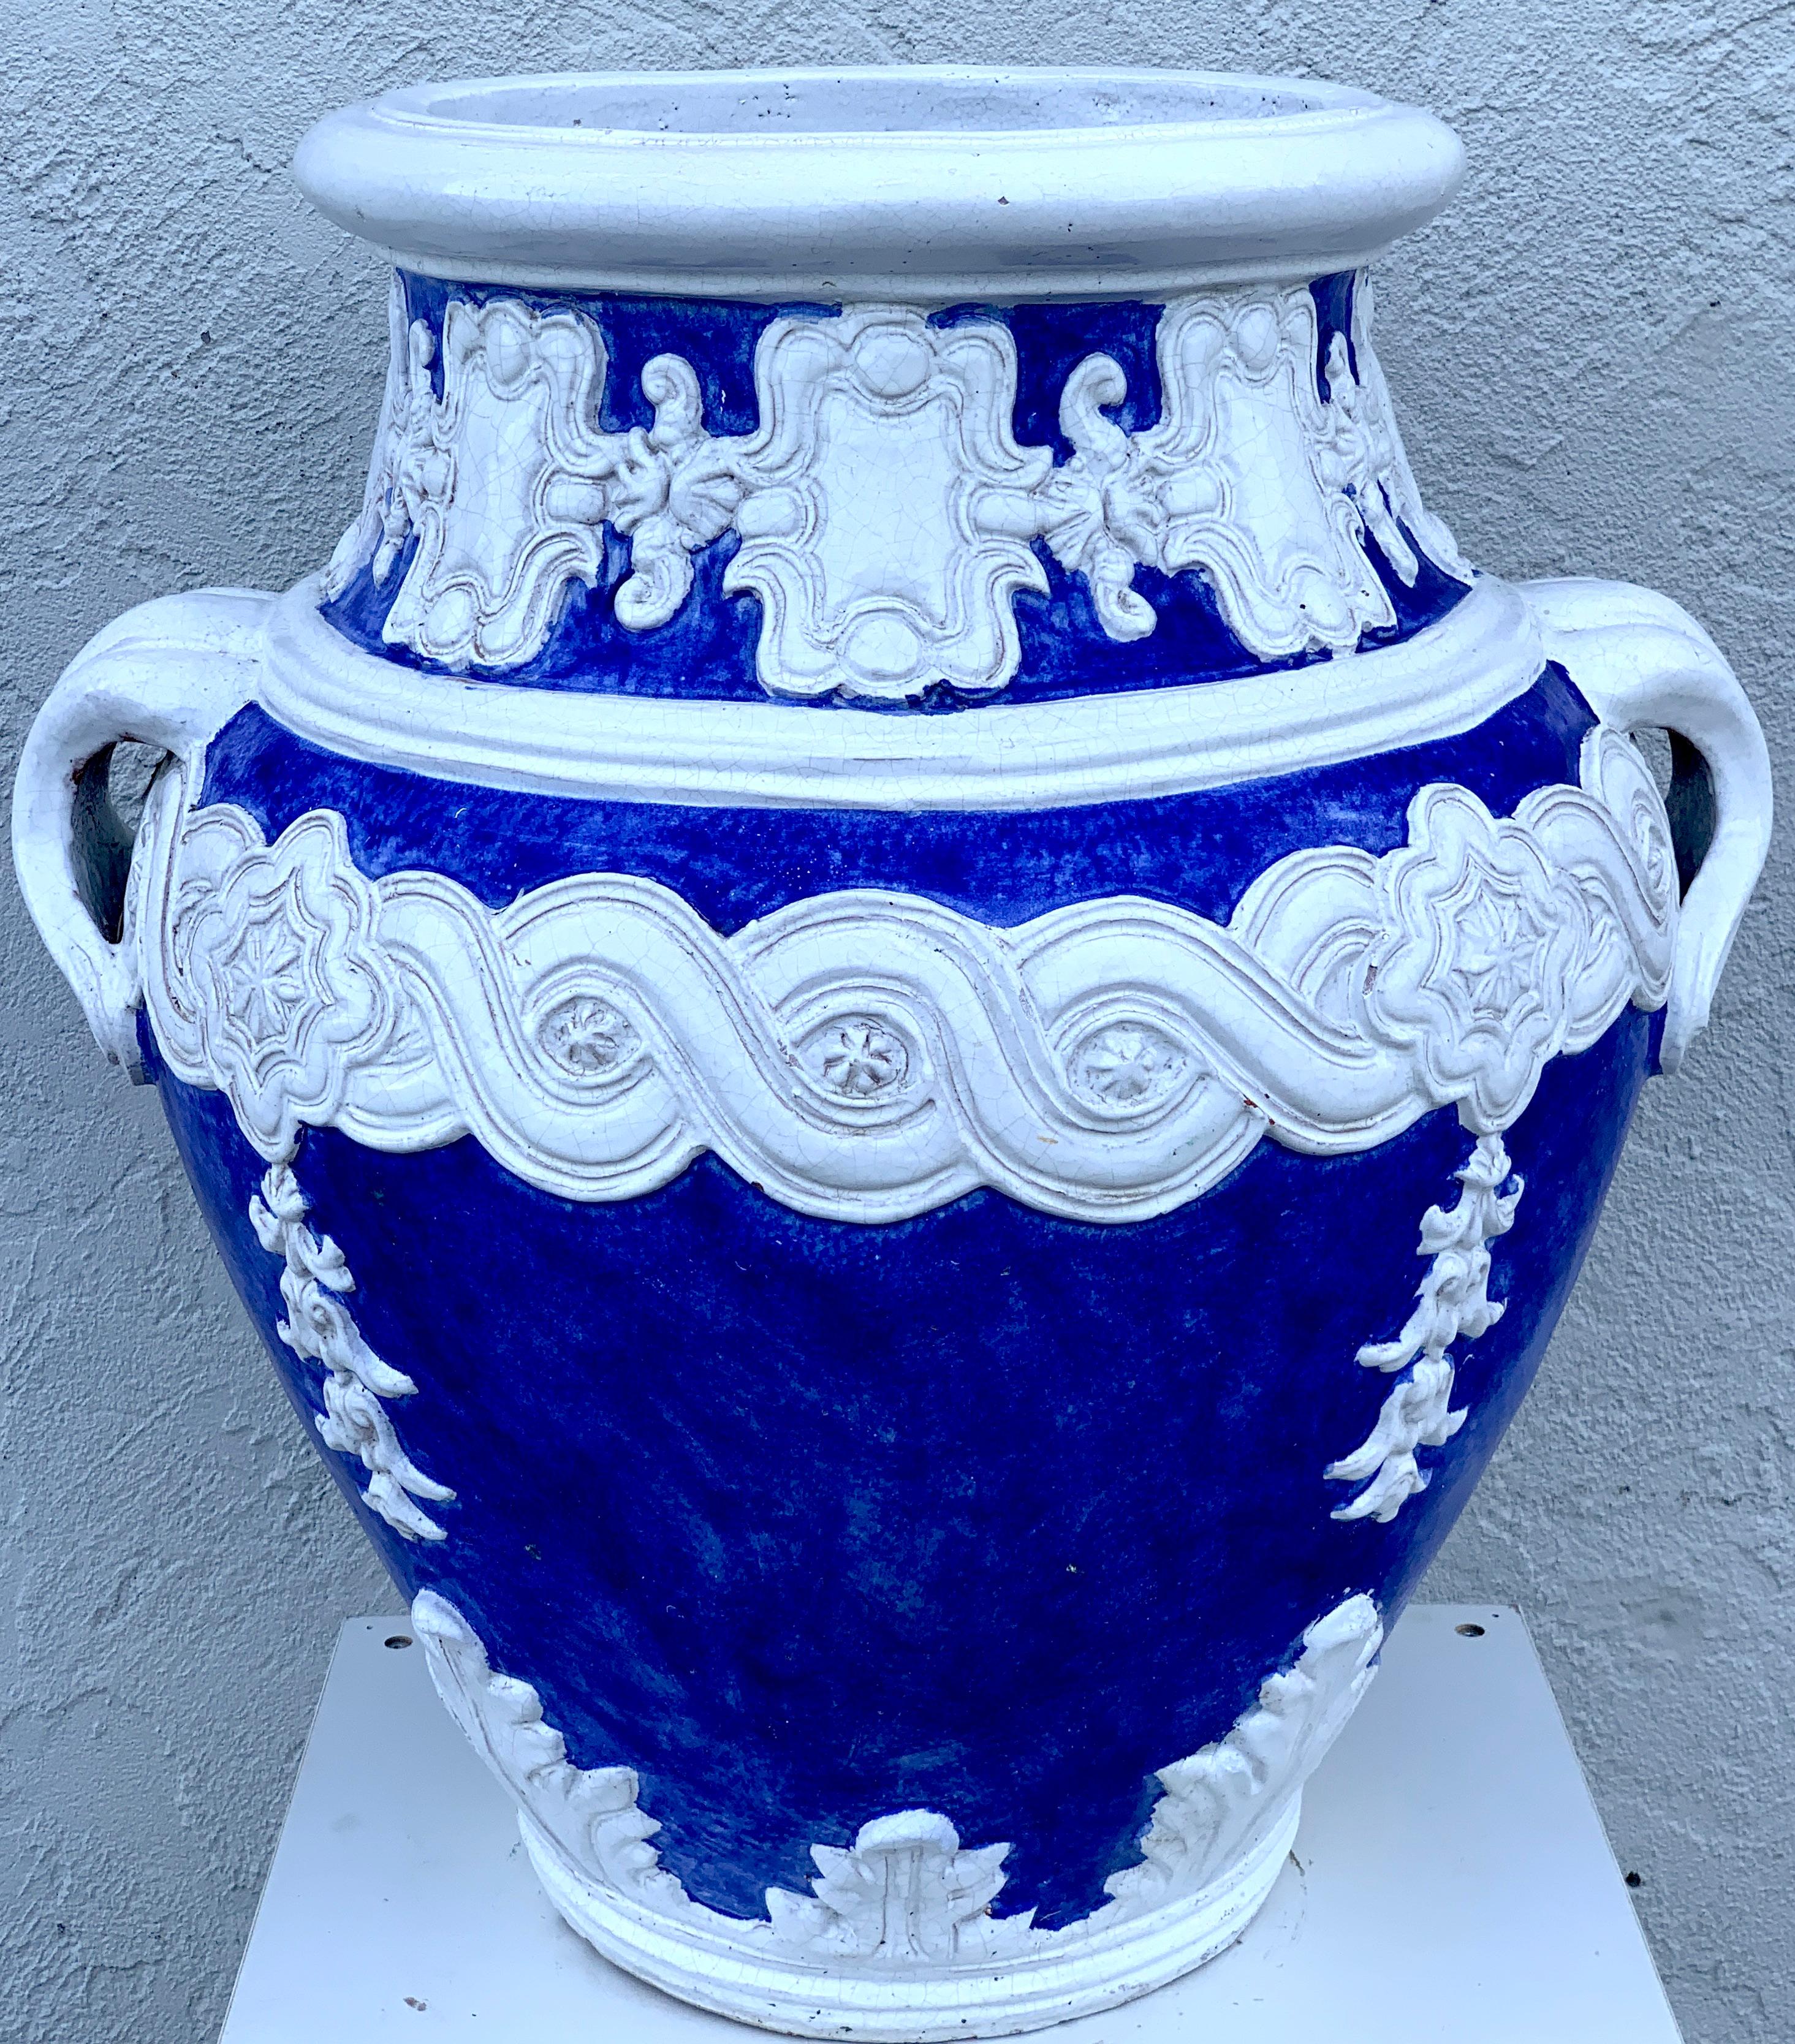 Italian blue and white Della Robbia style jardinière, Provenance, Celine Dion
Of large scale the two handled urn with white appliqués on a Tuscan blue background. Can be used indoors or outside. The opening diameter is 16.5